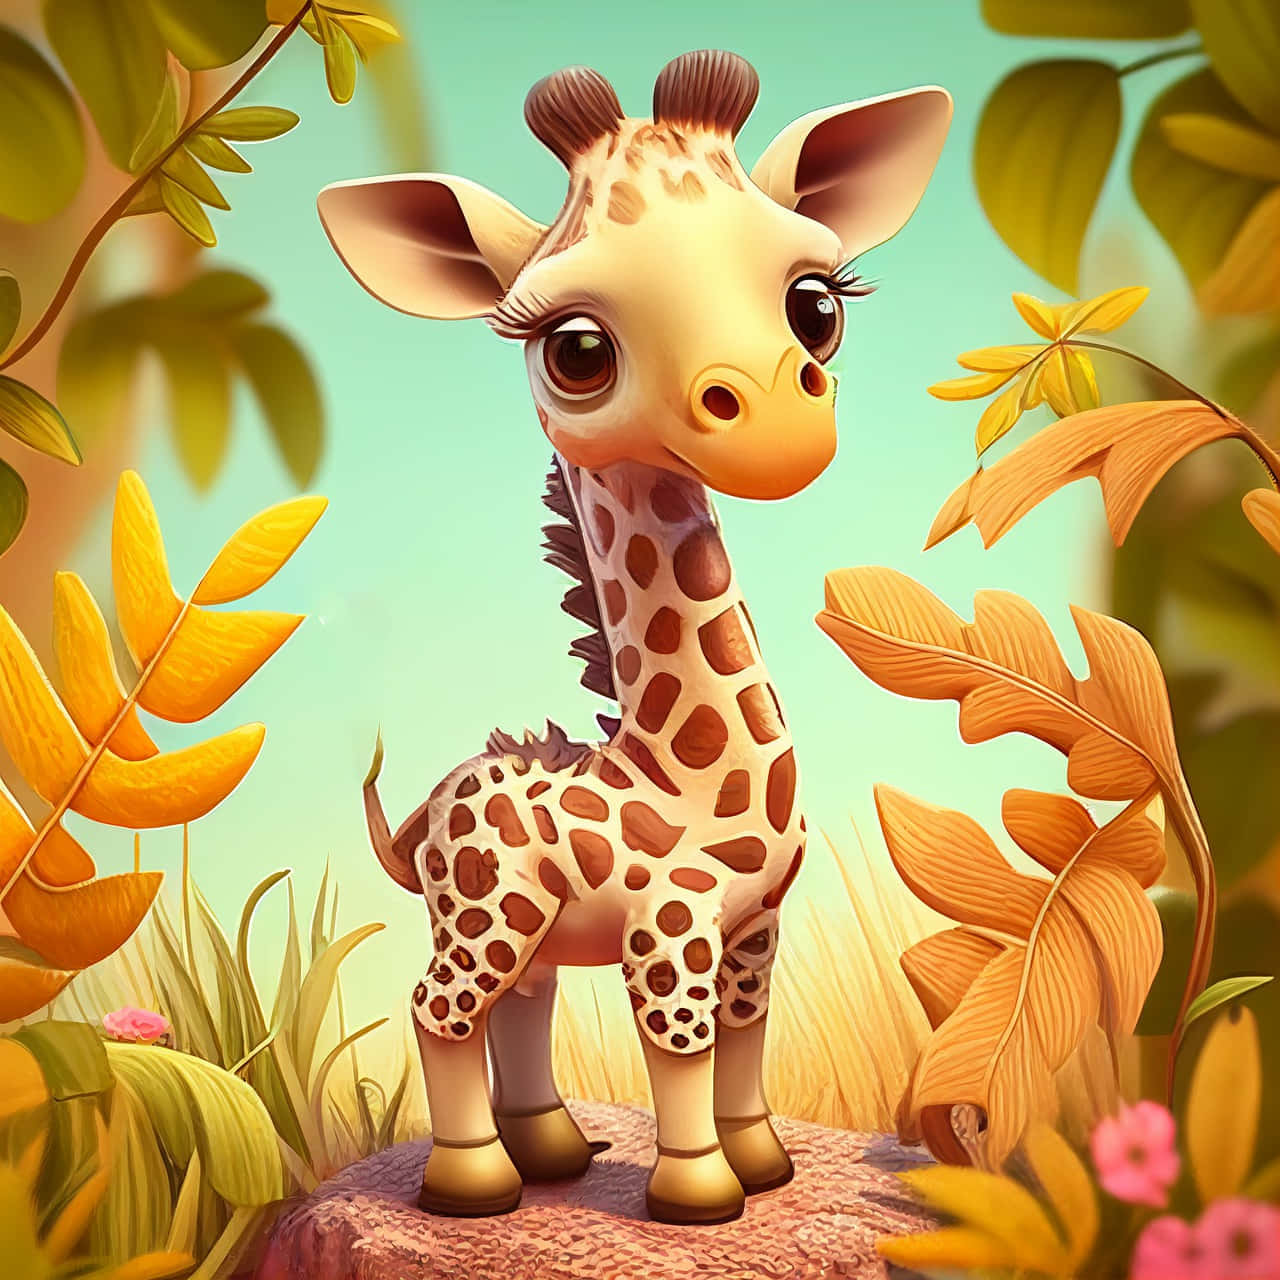 Giraffe Background Images HD Pictures and Wallpaper For Free Download   Pngtree